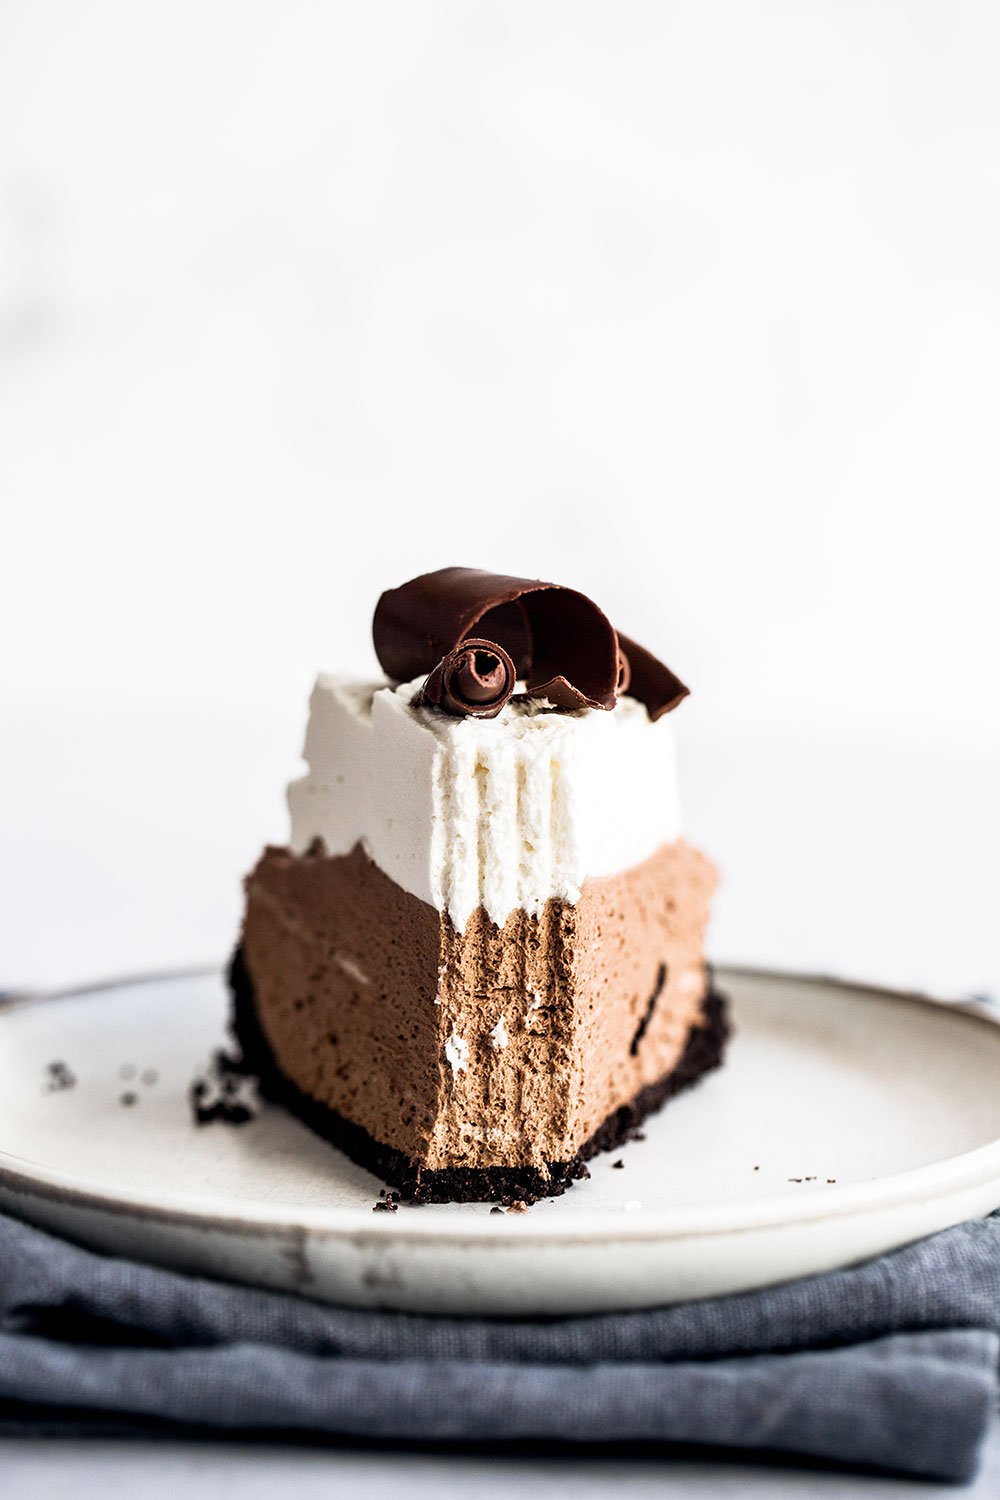 Homemade French Silk Pie is perfect for Thanksgiving, Christmas, Valentine's Day, or any special occasion!